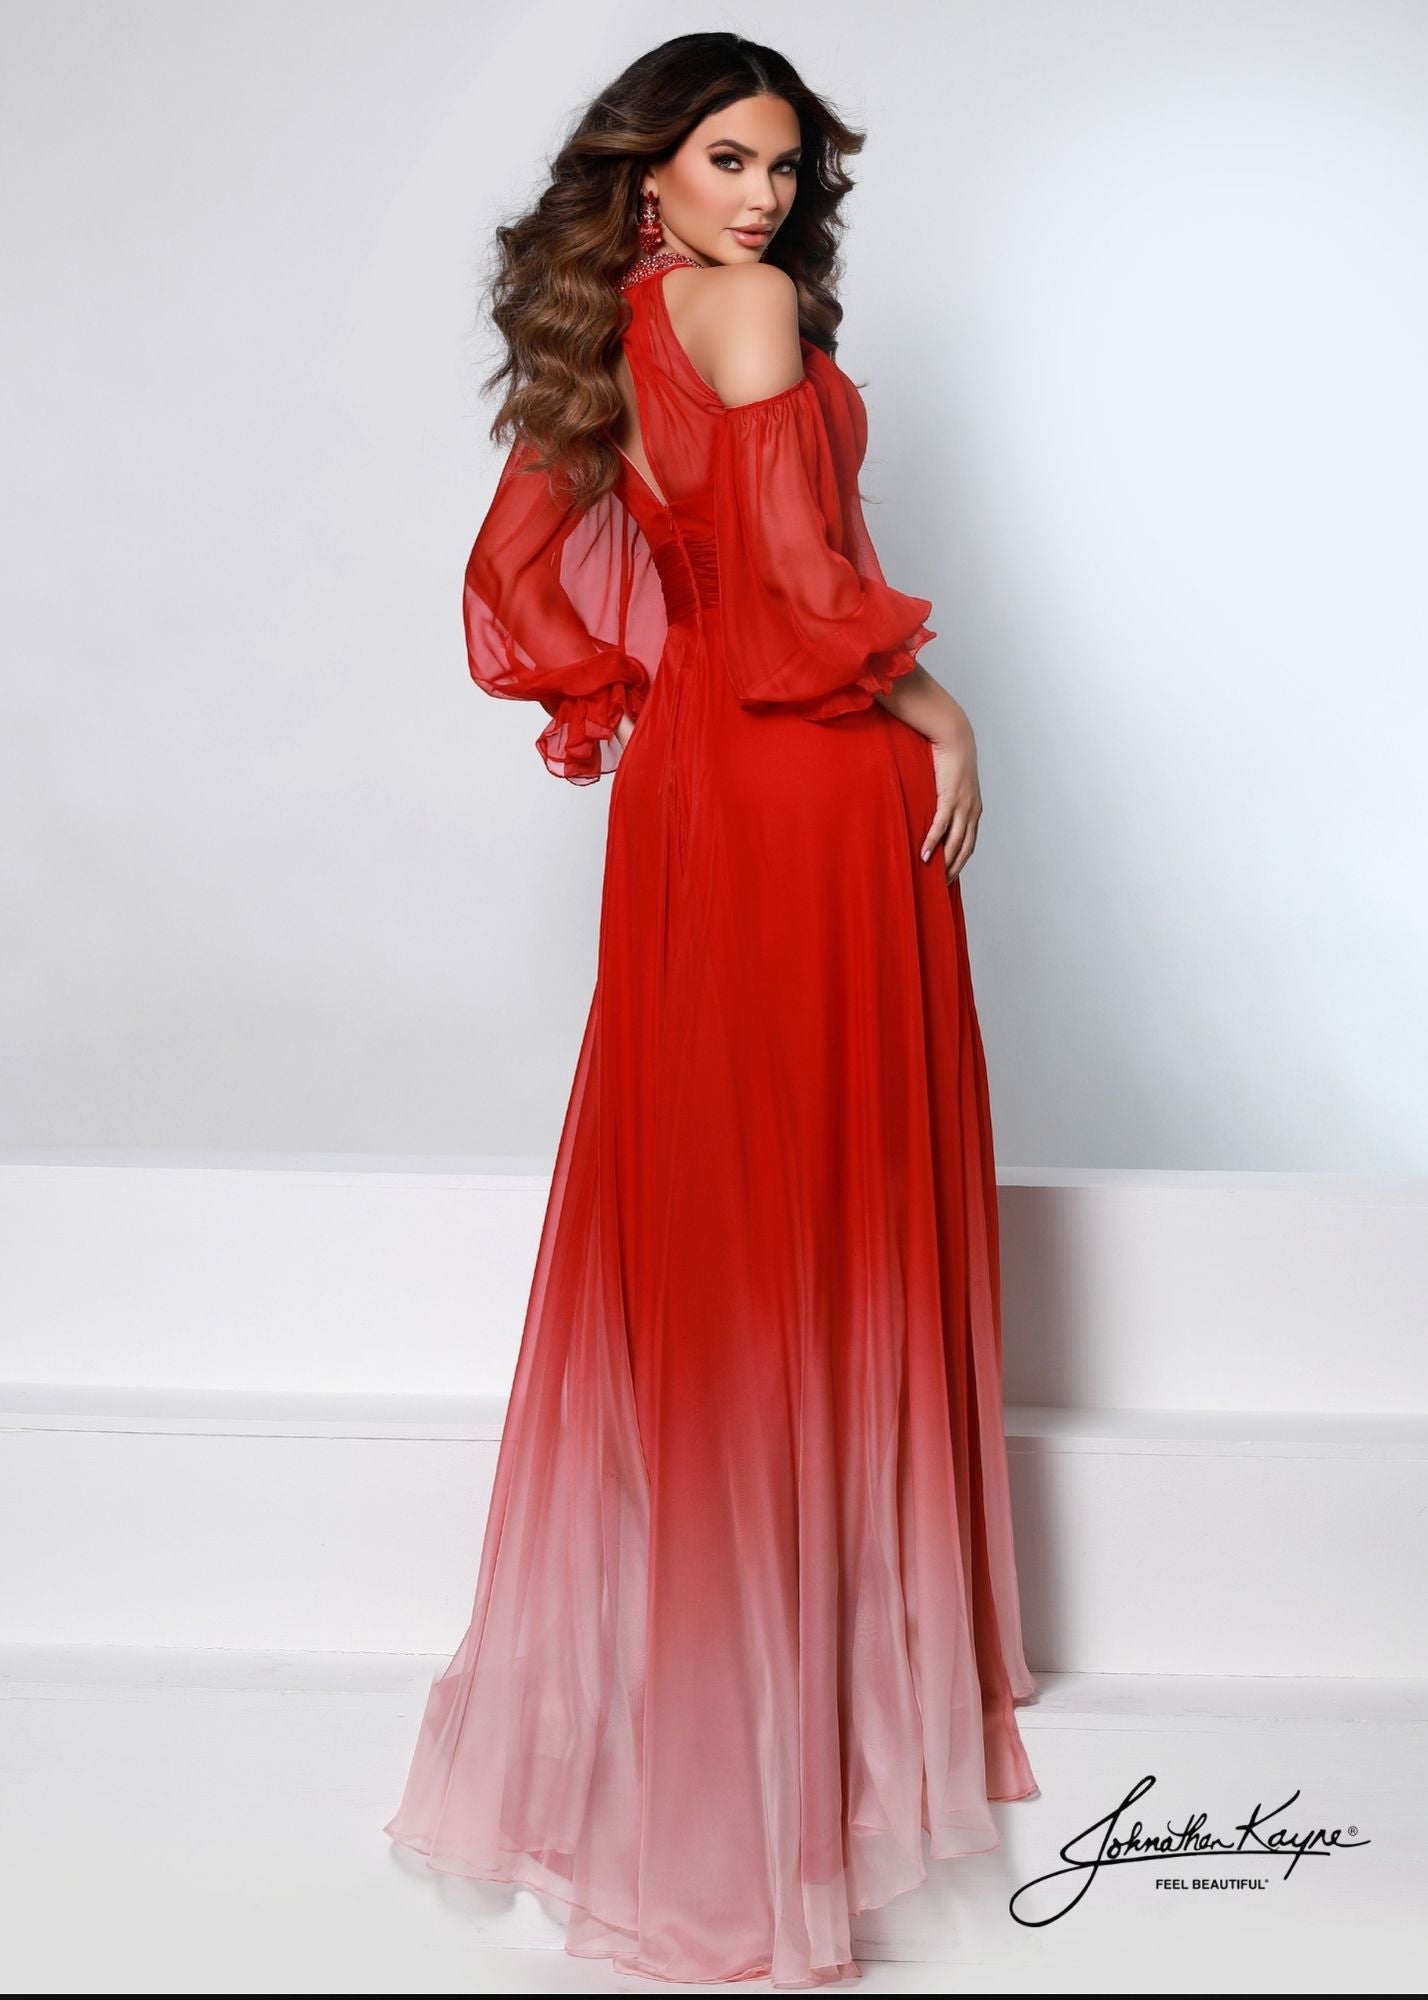 Look sexy and sophisticated with the Johnathan Kayne 3541 Size 2, 4 Cherry Ombre Chiffon Dress! The long sleeves and high neck make it a perfect formal wear option, with a hint of daring edge from the daring side slit. Slay at the party, and everyone will know who's cherry-on-top!  Size: 2, 4  Color: Cherry/Ombre